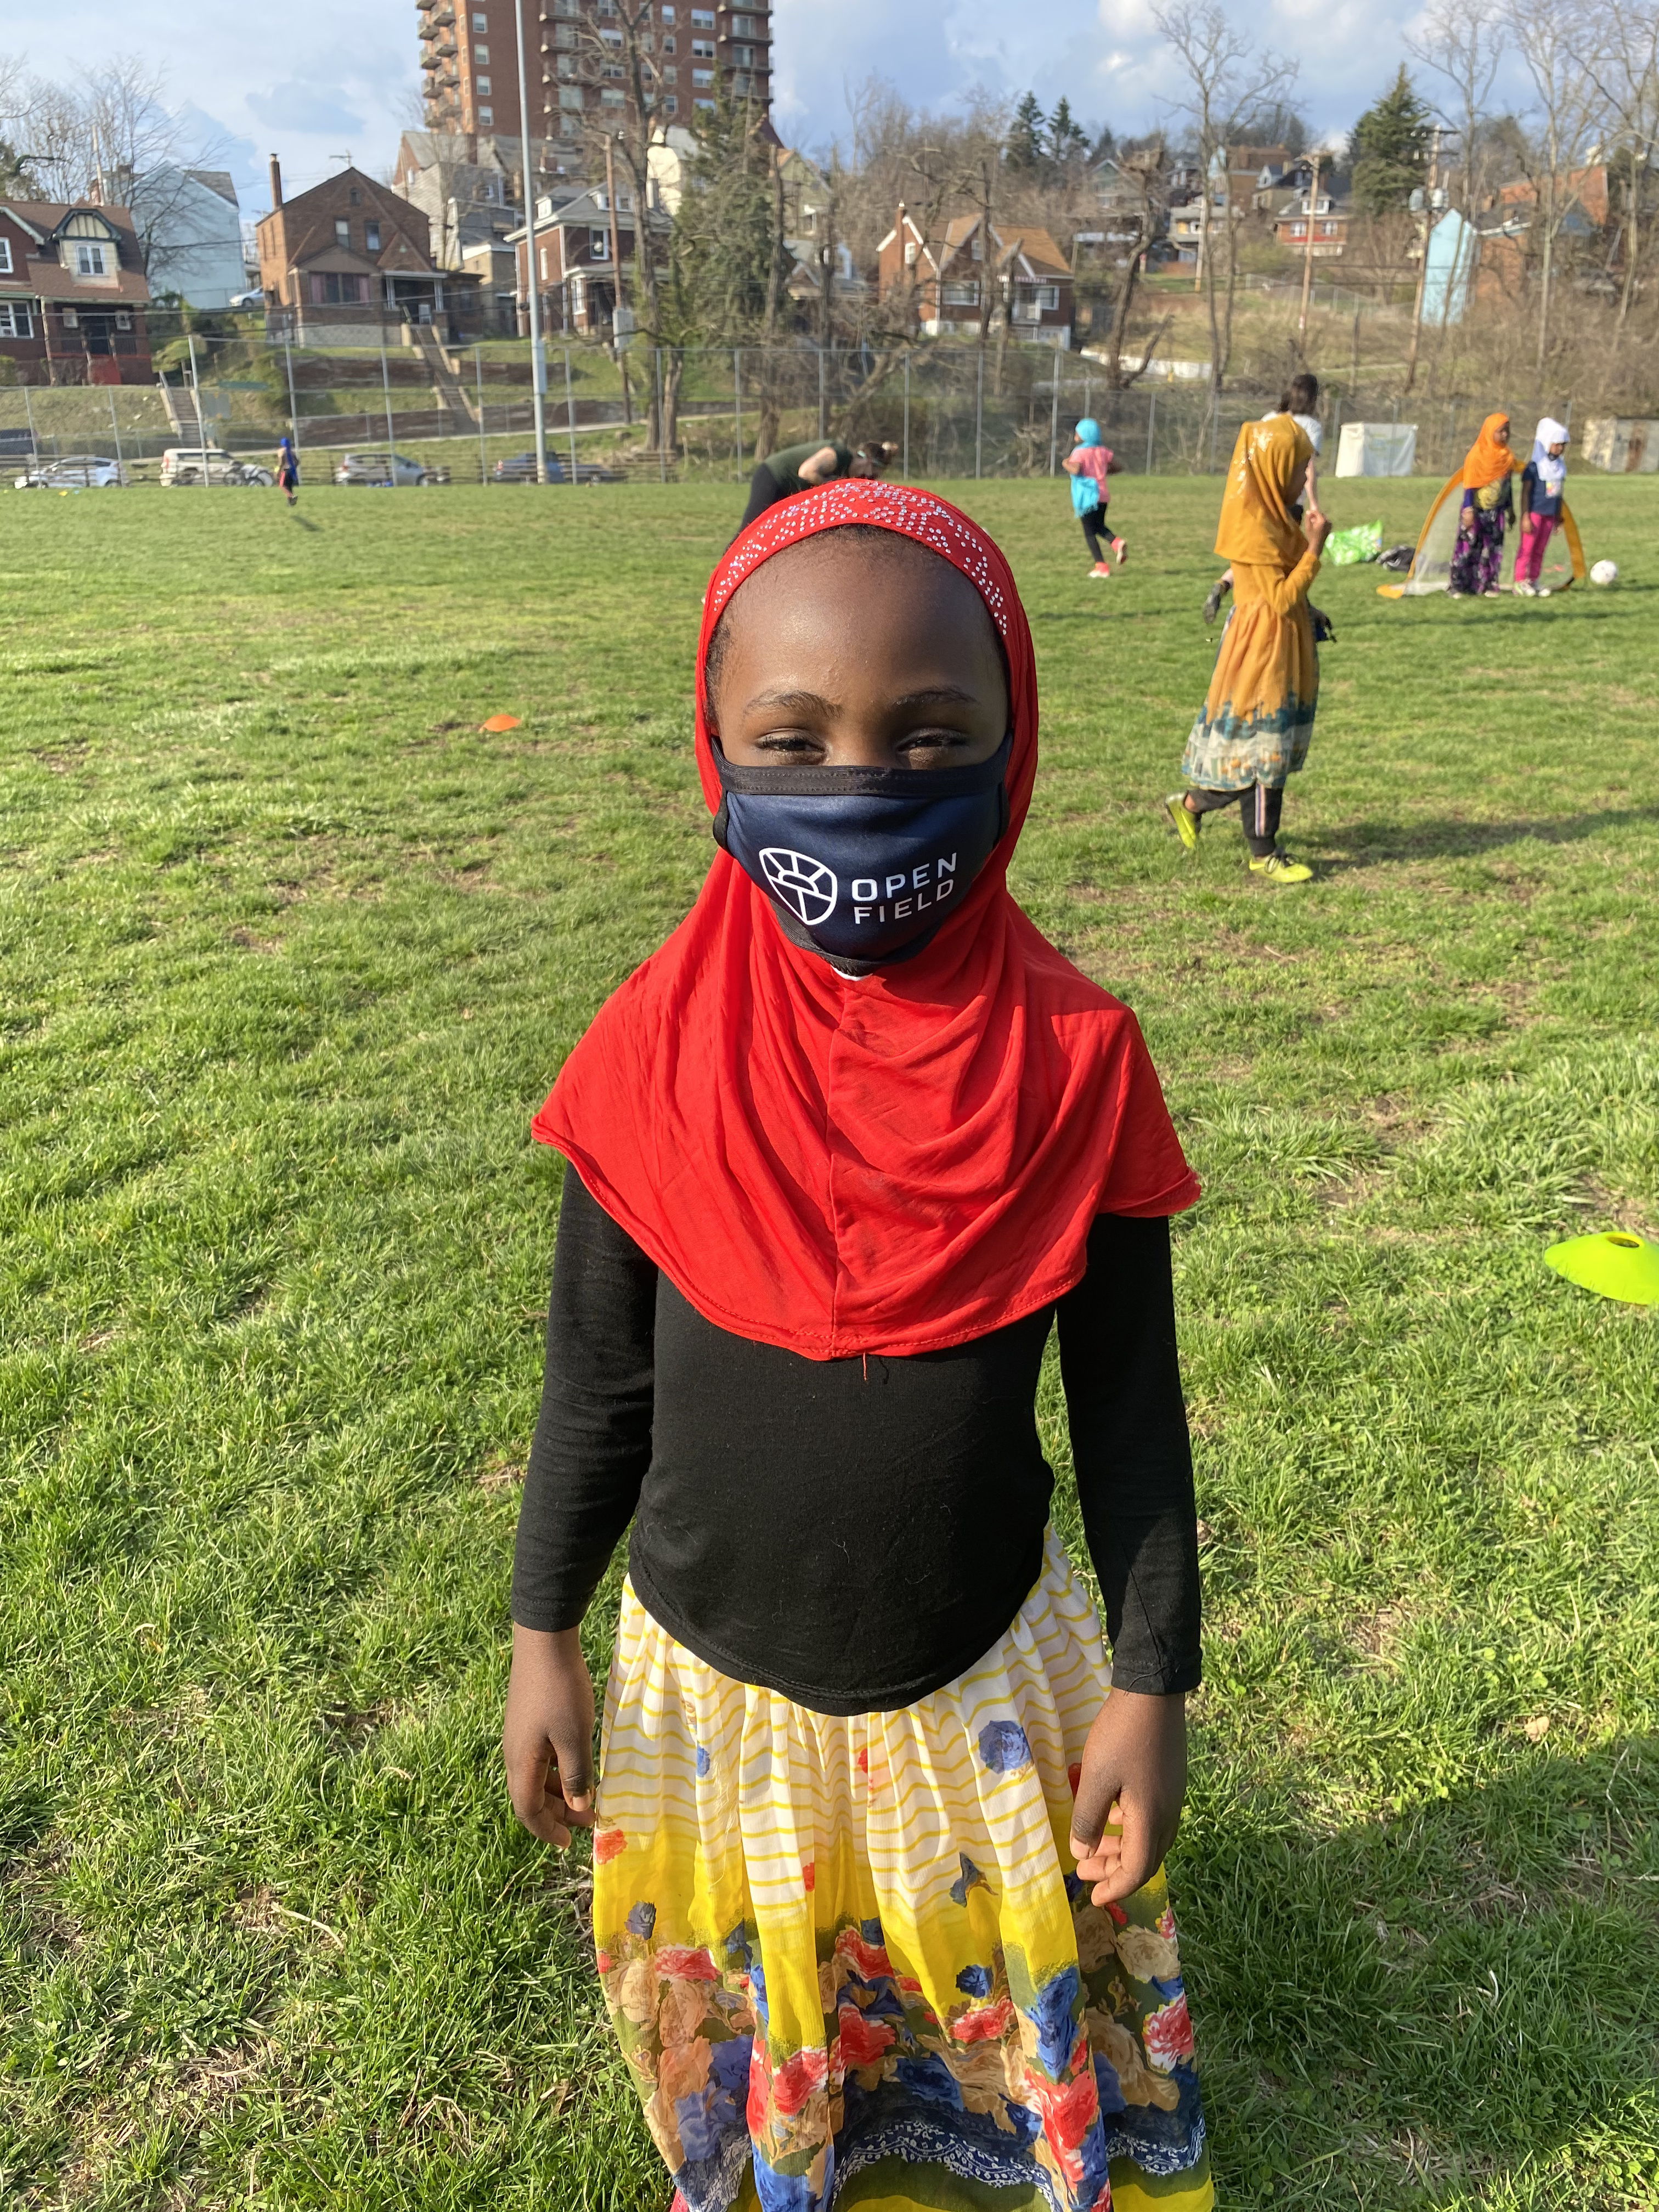 A youngster in a facial covering poses for a photo during one of Open Field's sessions. (Open Field)